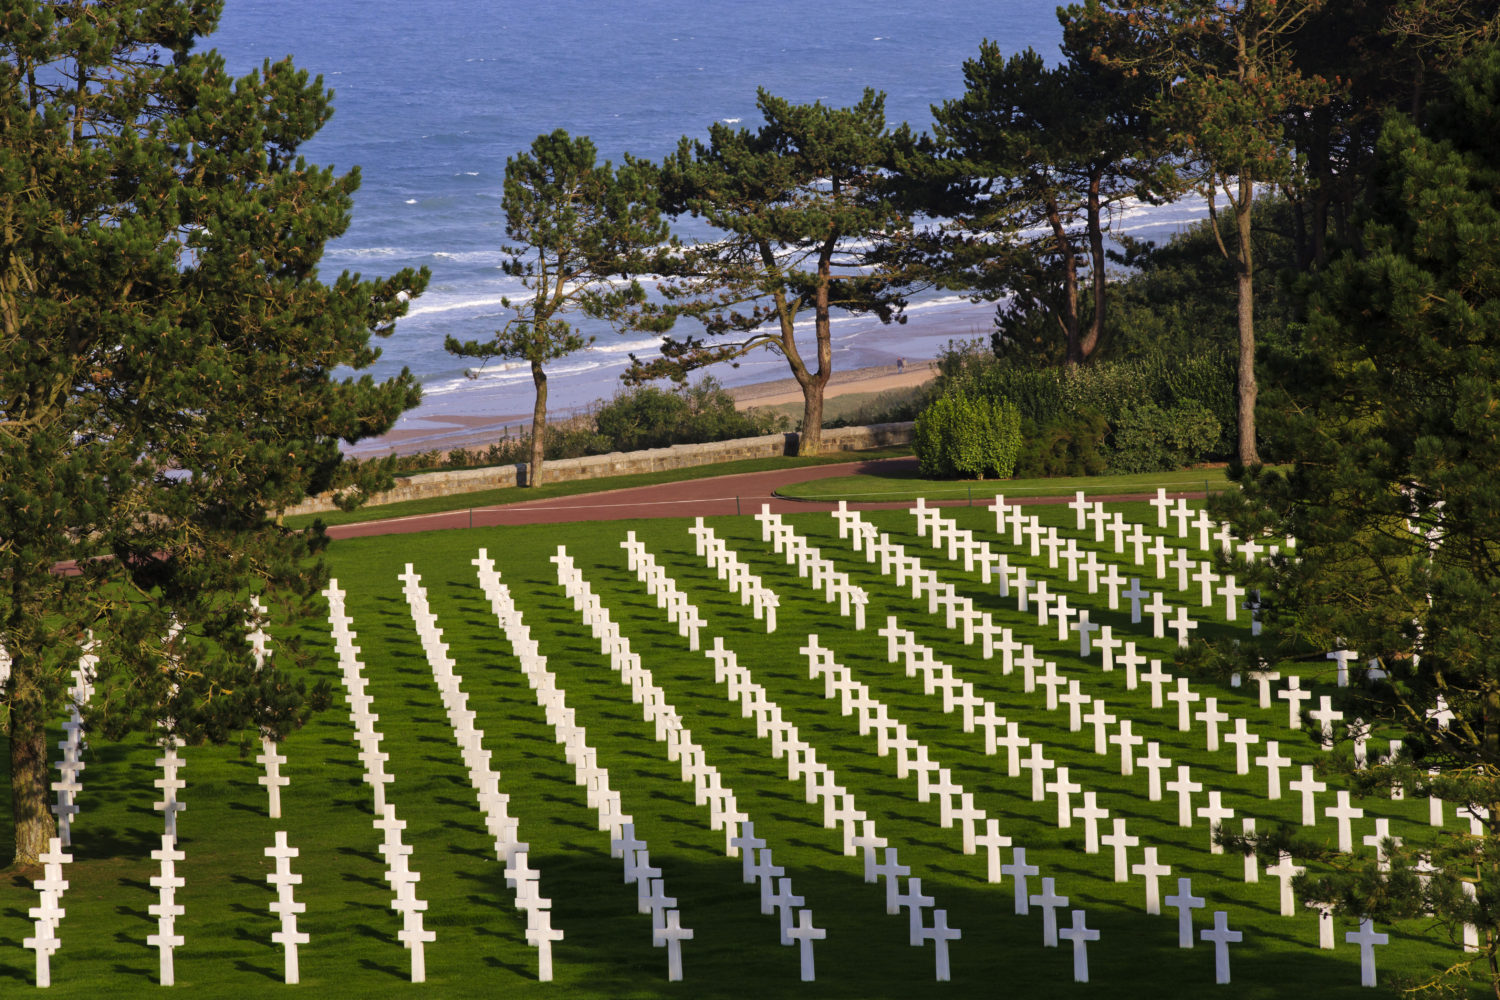 Graves of the fallen with Omaha Beach in the background at the Normandy American Cemetery and Memorial, September 27, 2013, Colleville-sur-Mer, France (Warrick Page/American Battle Monuments Commission) spectator.org